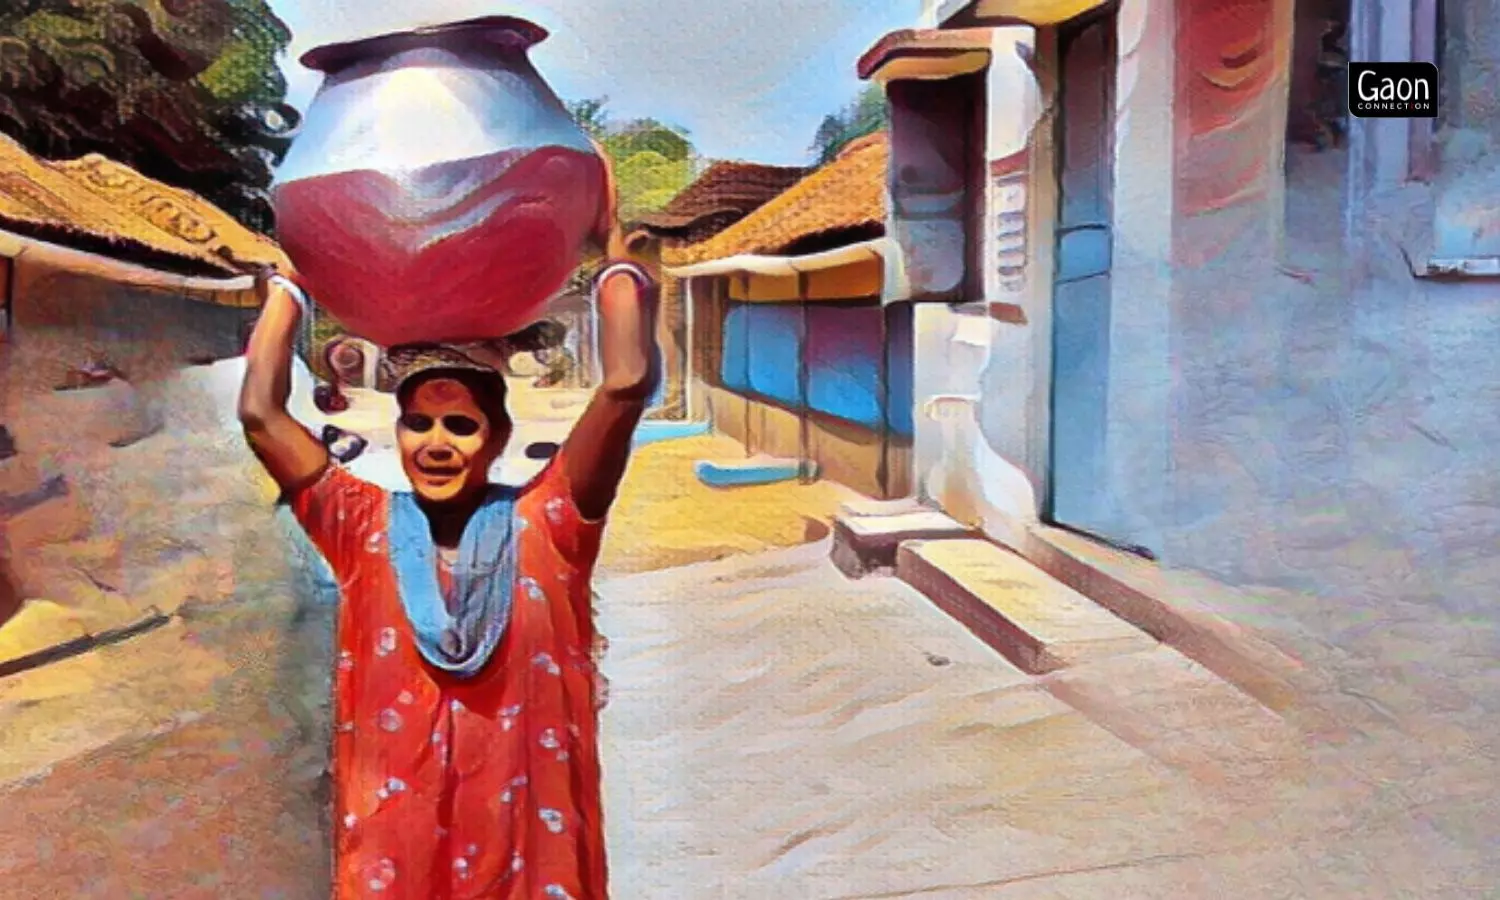 Harvesting rainwater saves the day for residents of a tribal village in Jharkhand